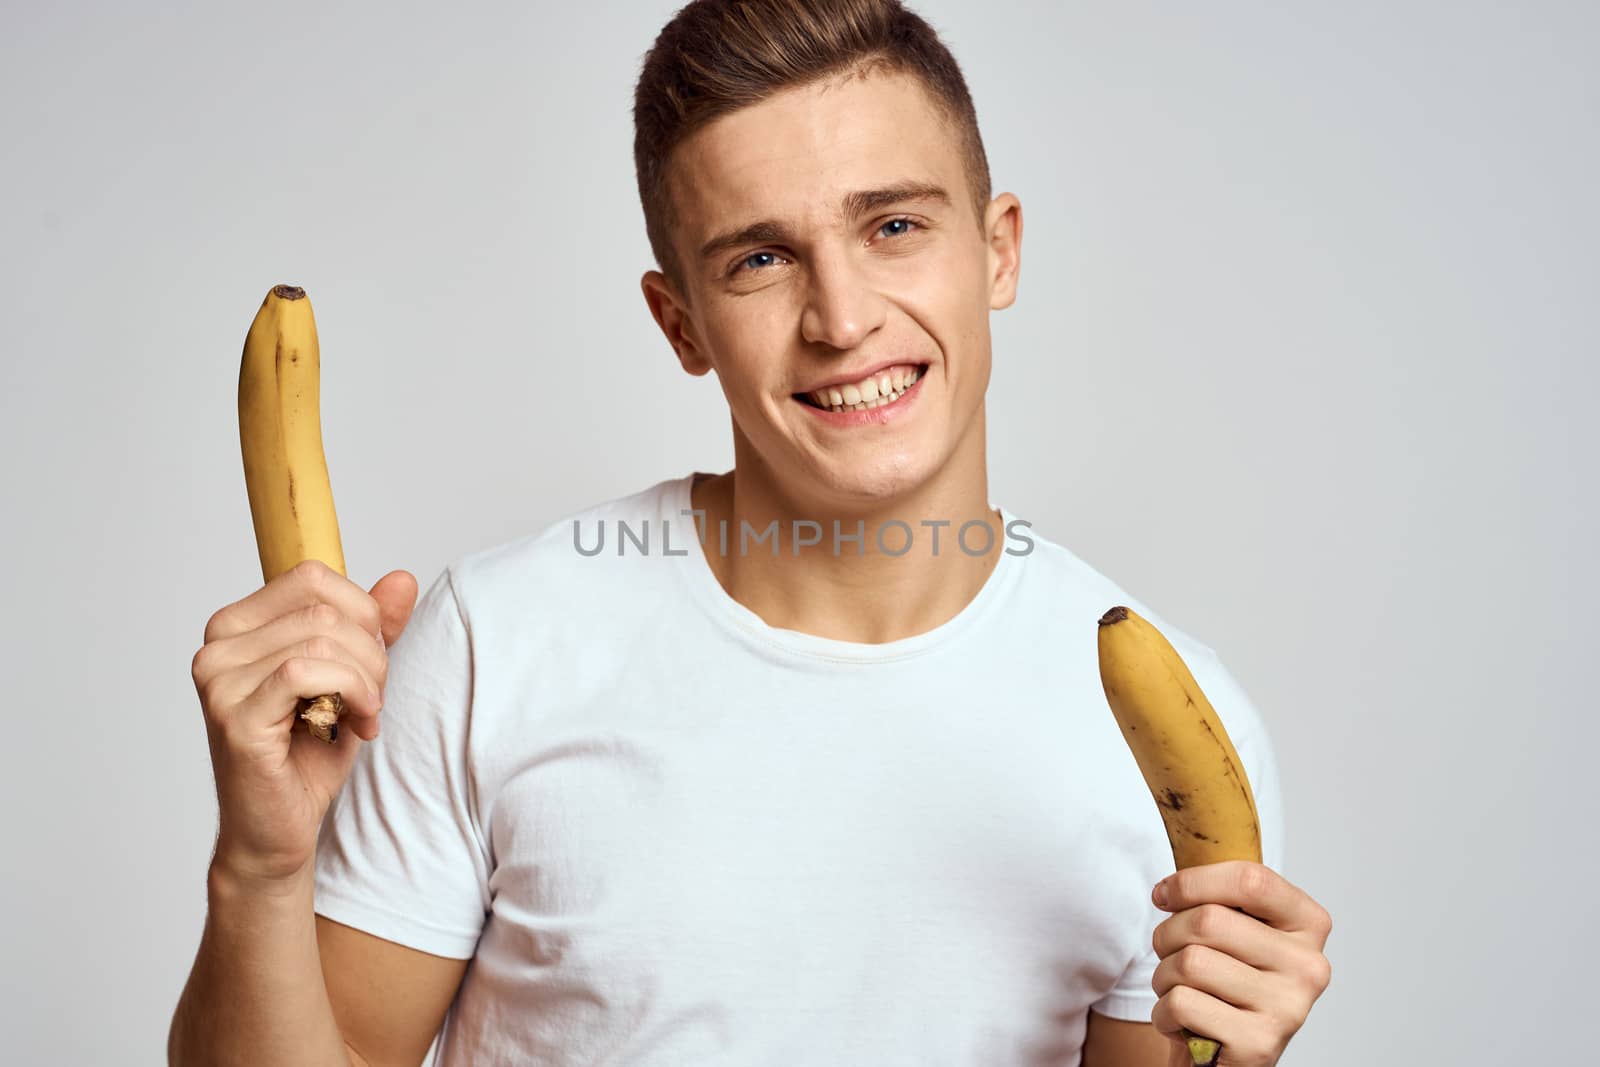 guy with a banana in his hand on a light background fun emotions light background white t-shirt model. High quality photo